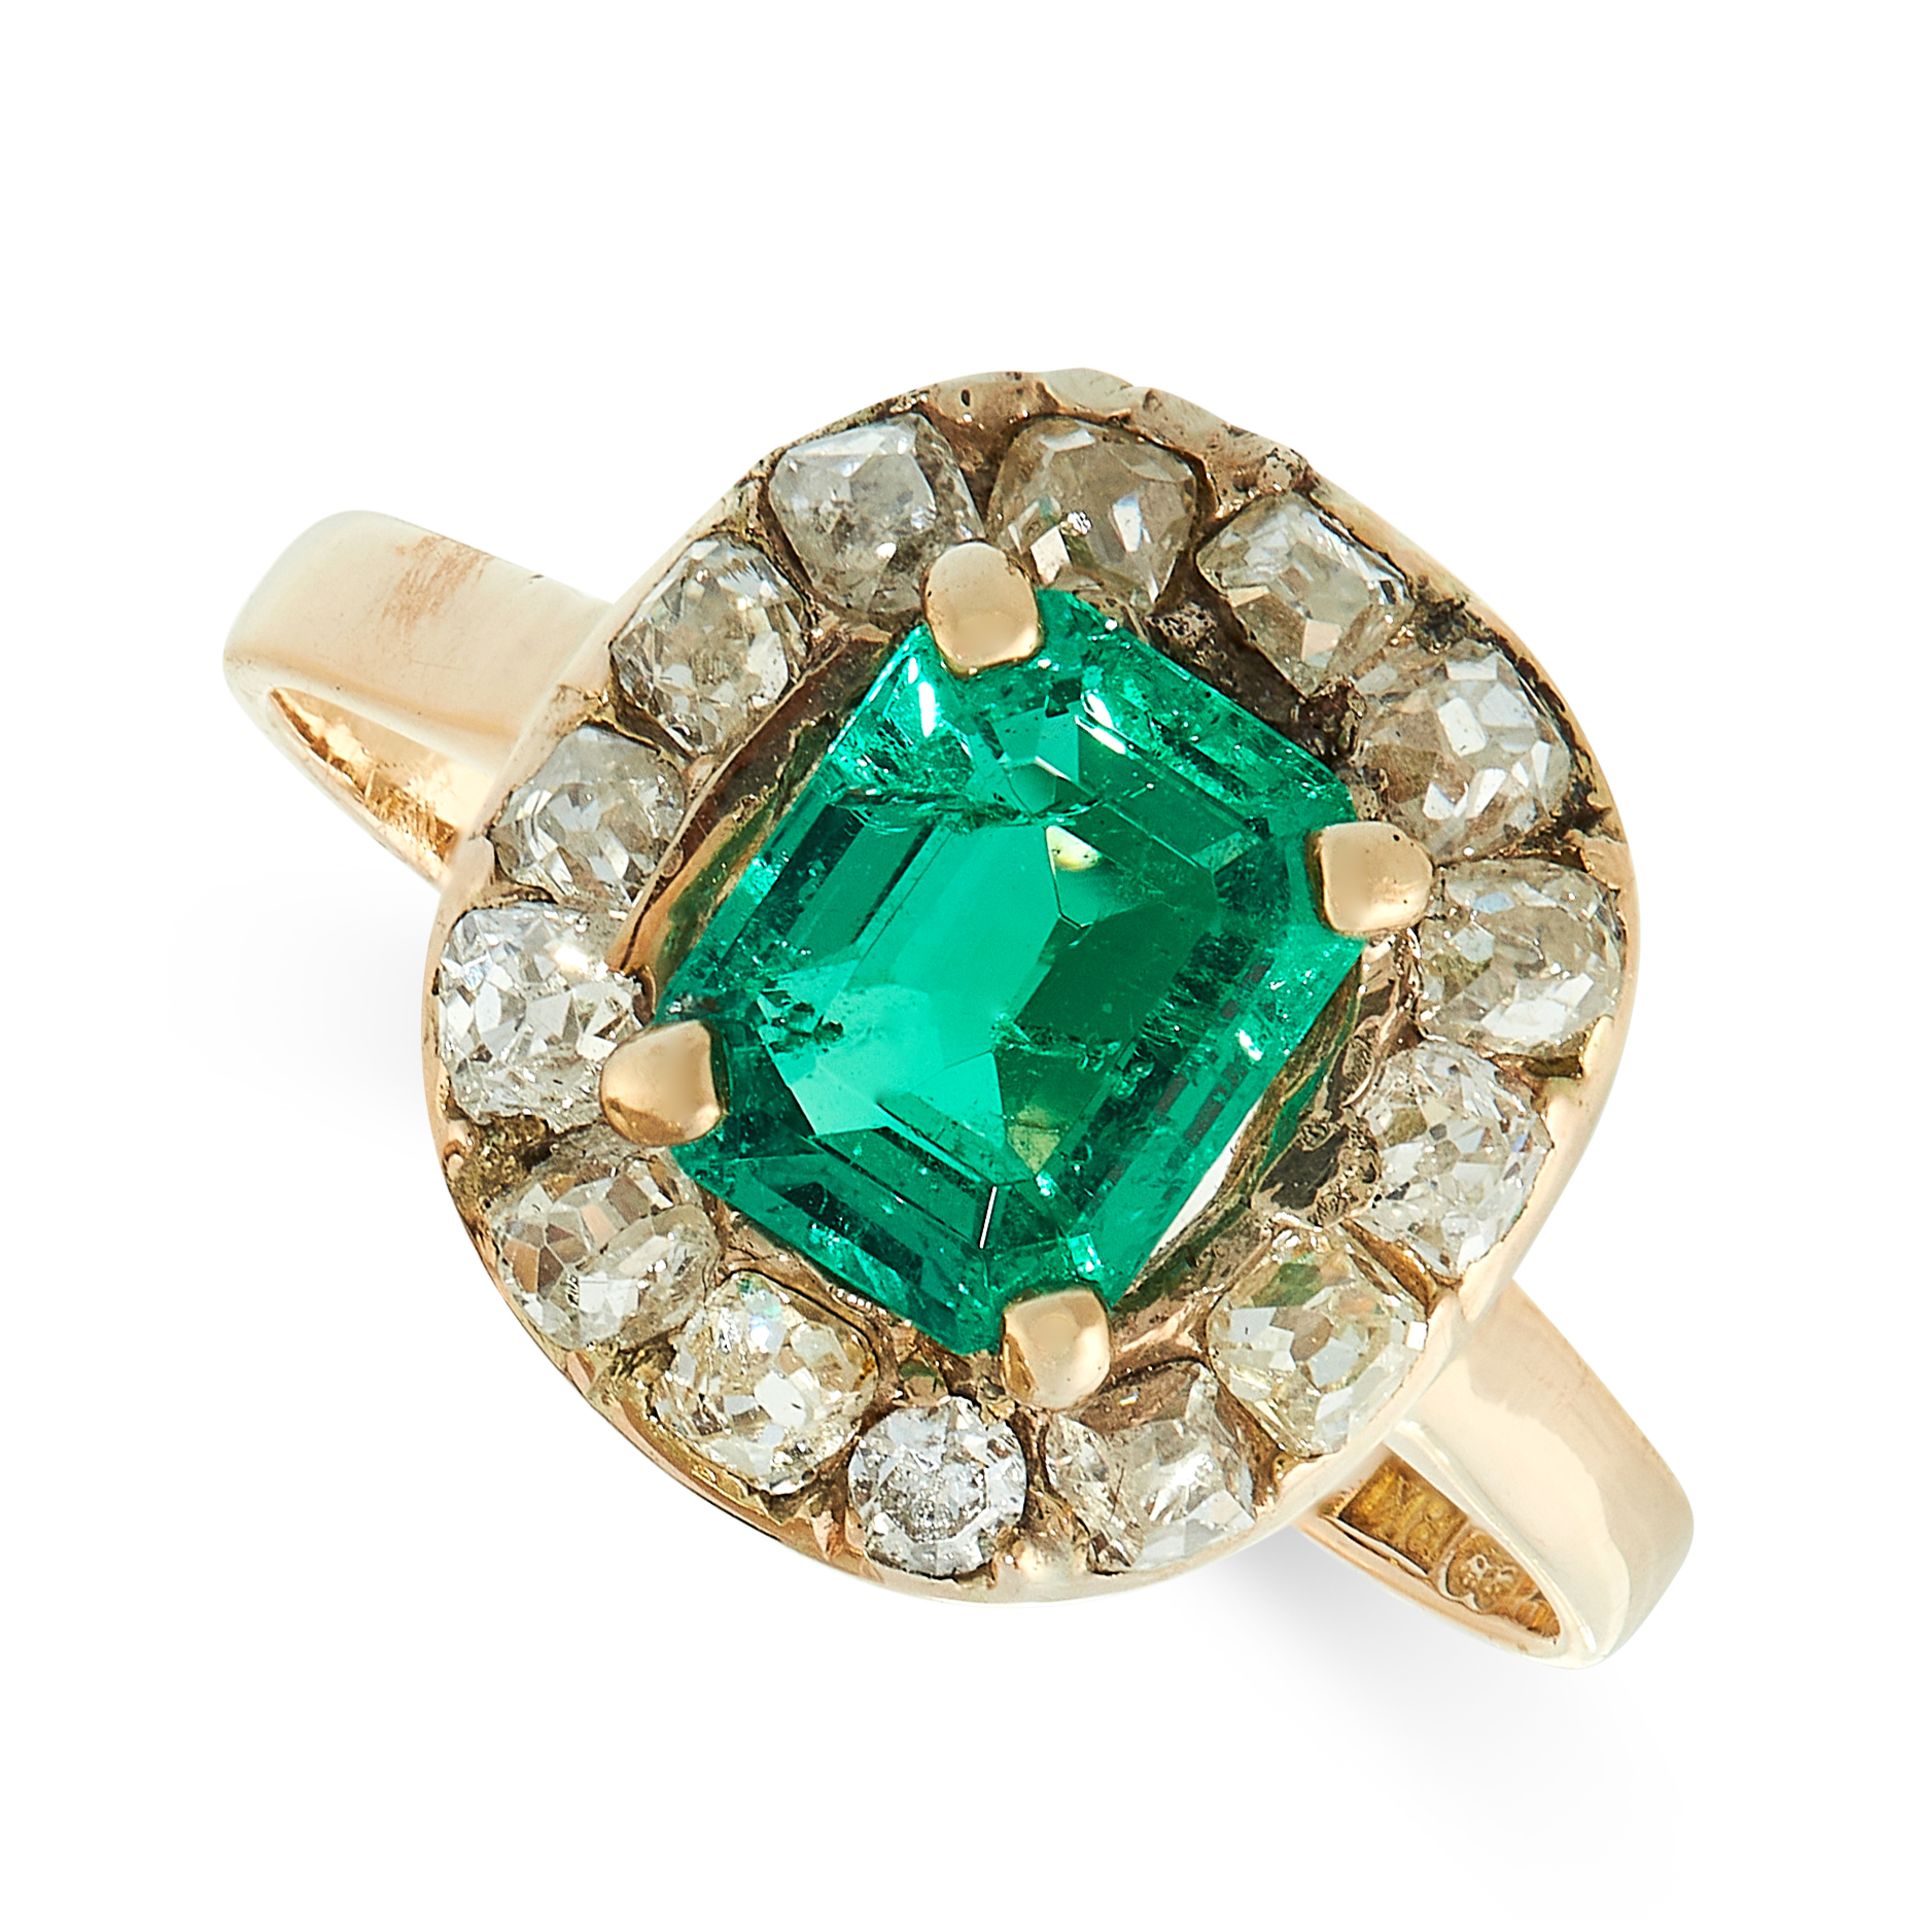 EMERALD AND DIAMOND RING of cluster design, set with a step-cut emerald estimated to weigh